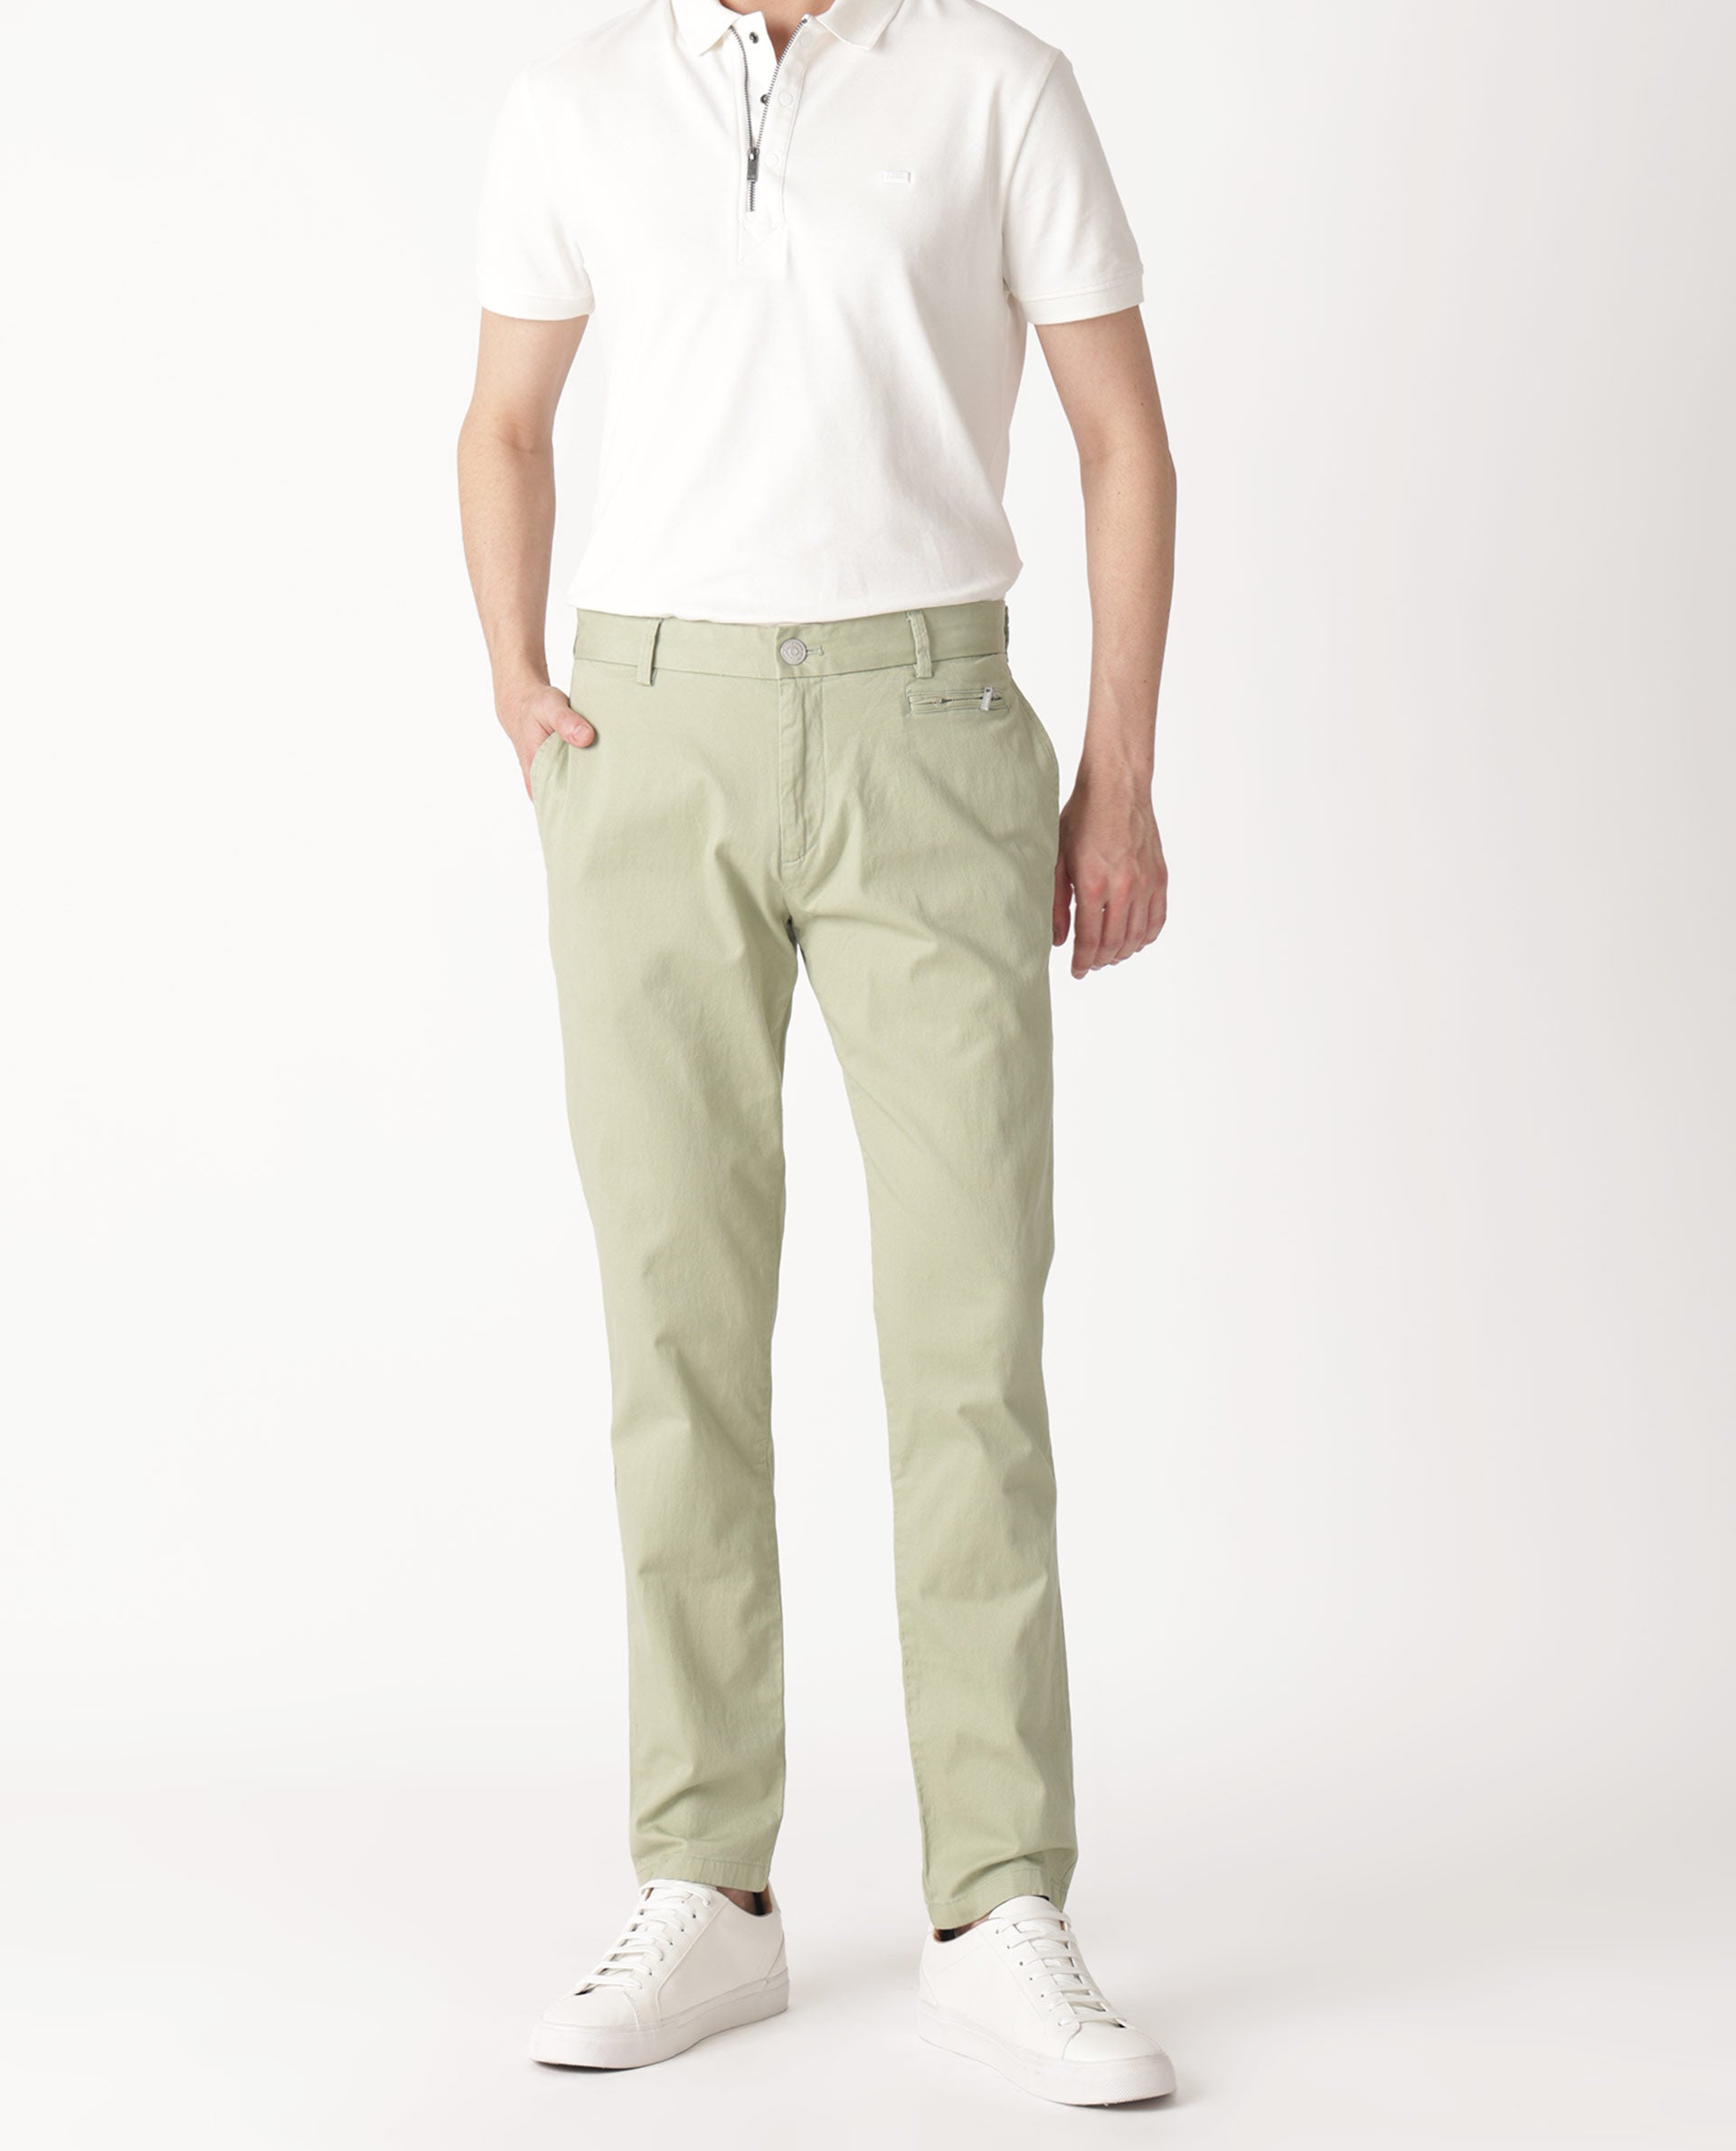 Women's Cotton Crop Top with Ankle Length Trousers Set – S & F Online Store